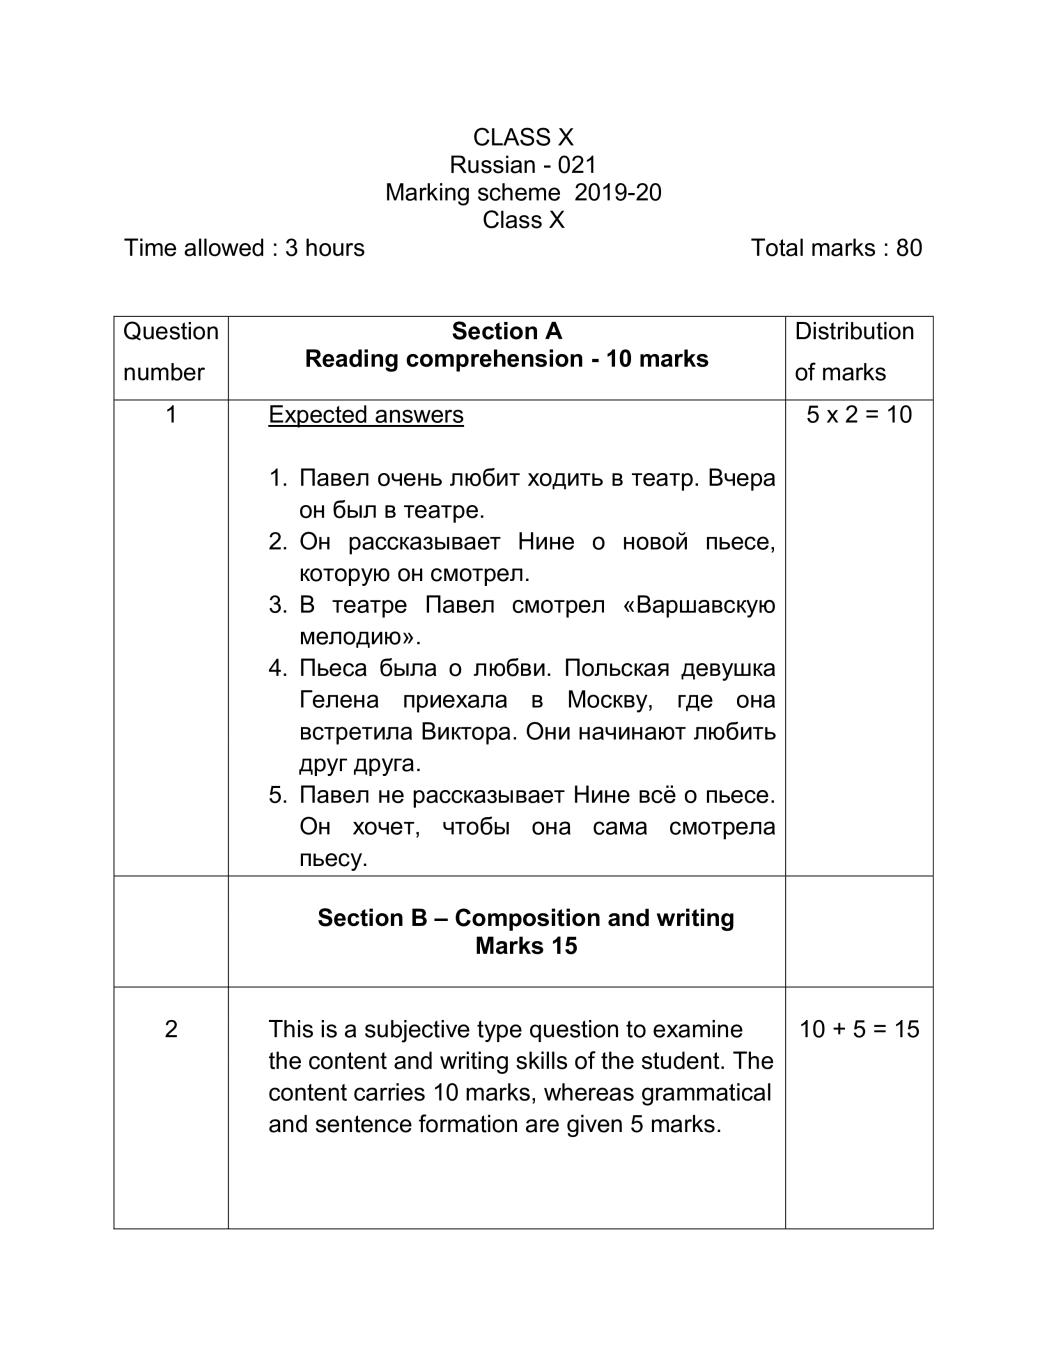 CBSE Class 10 Marking Scheme 2020 for Russian - Page 1